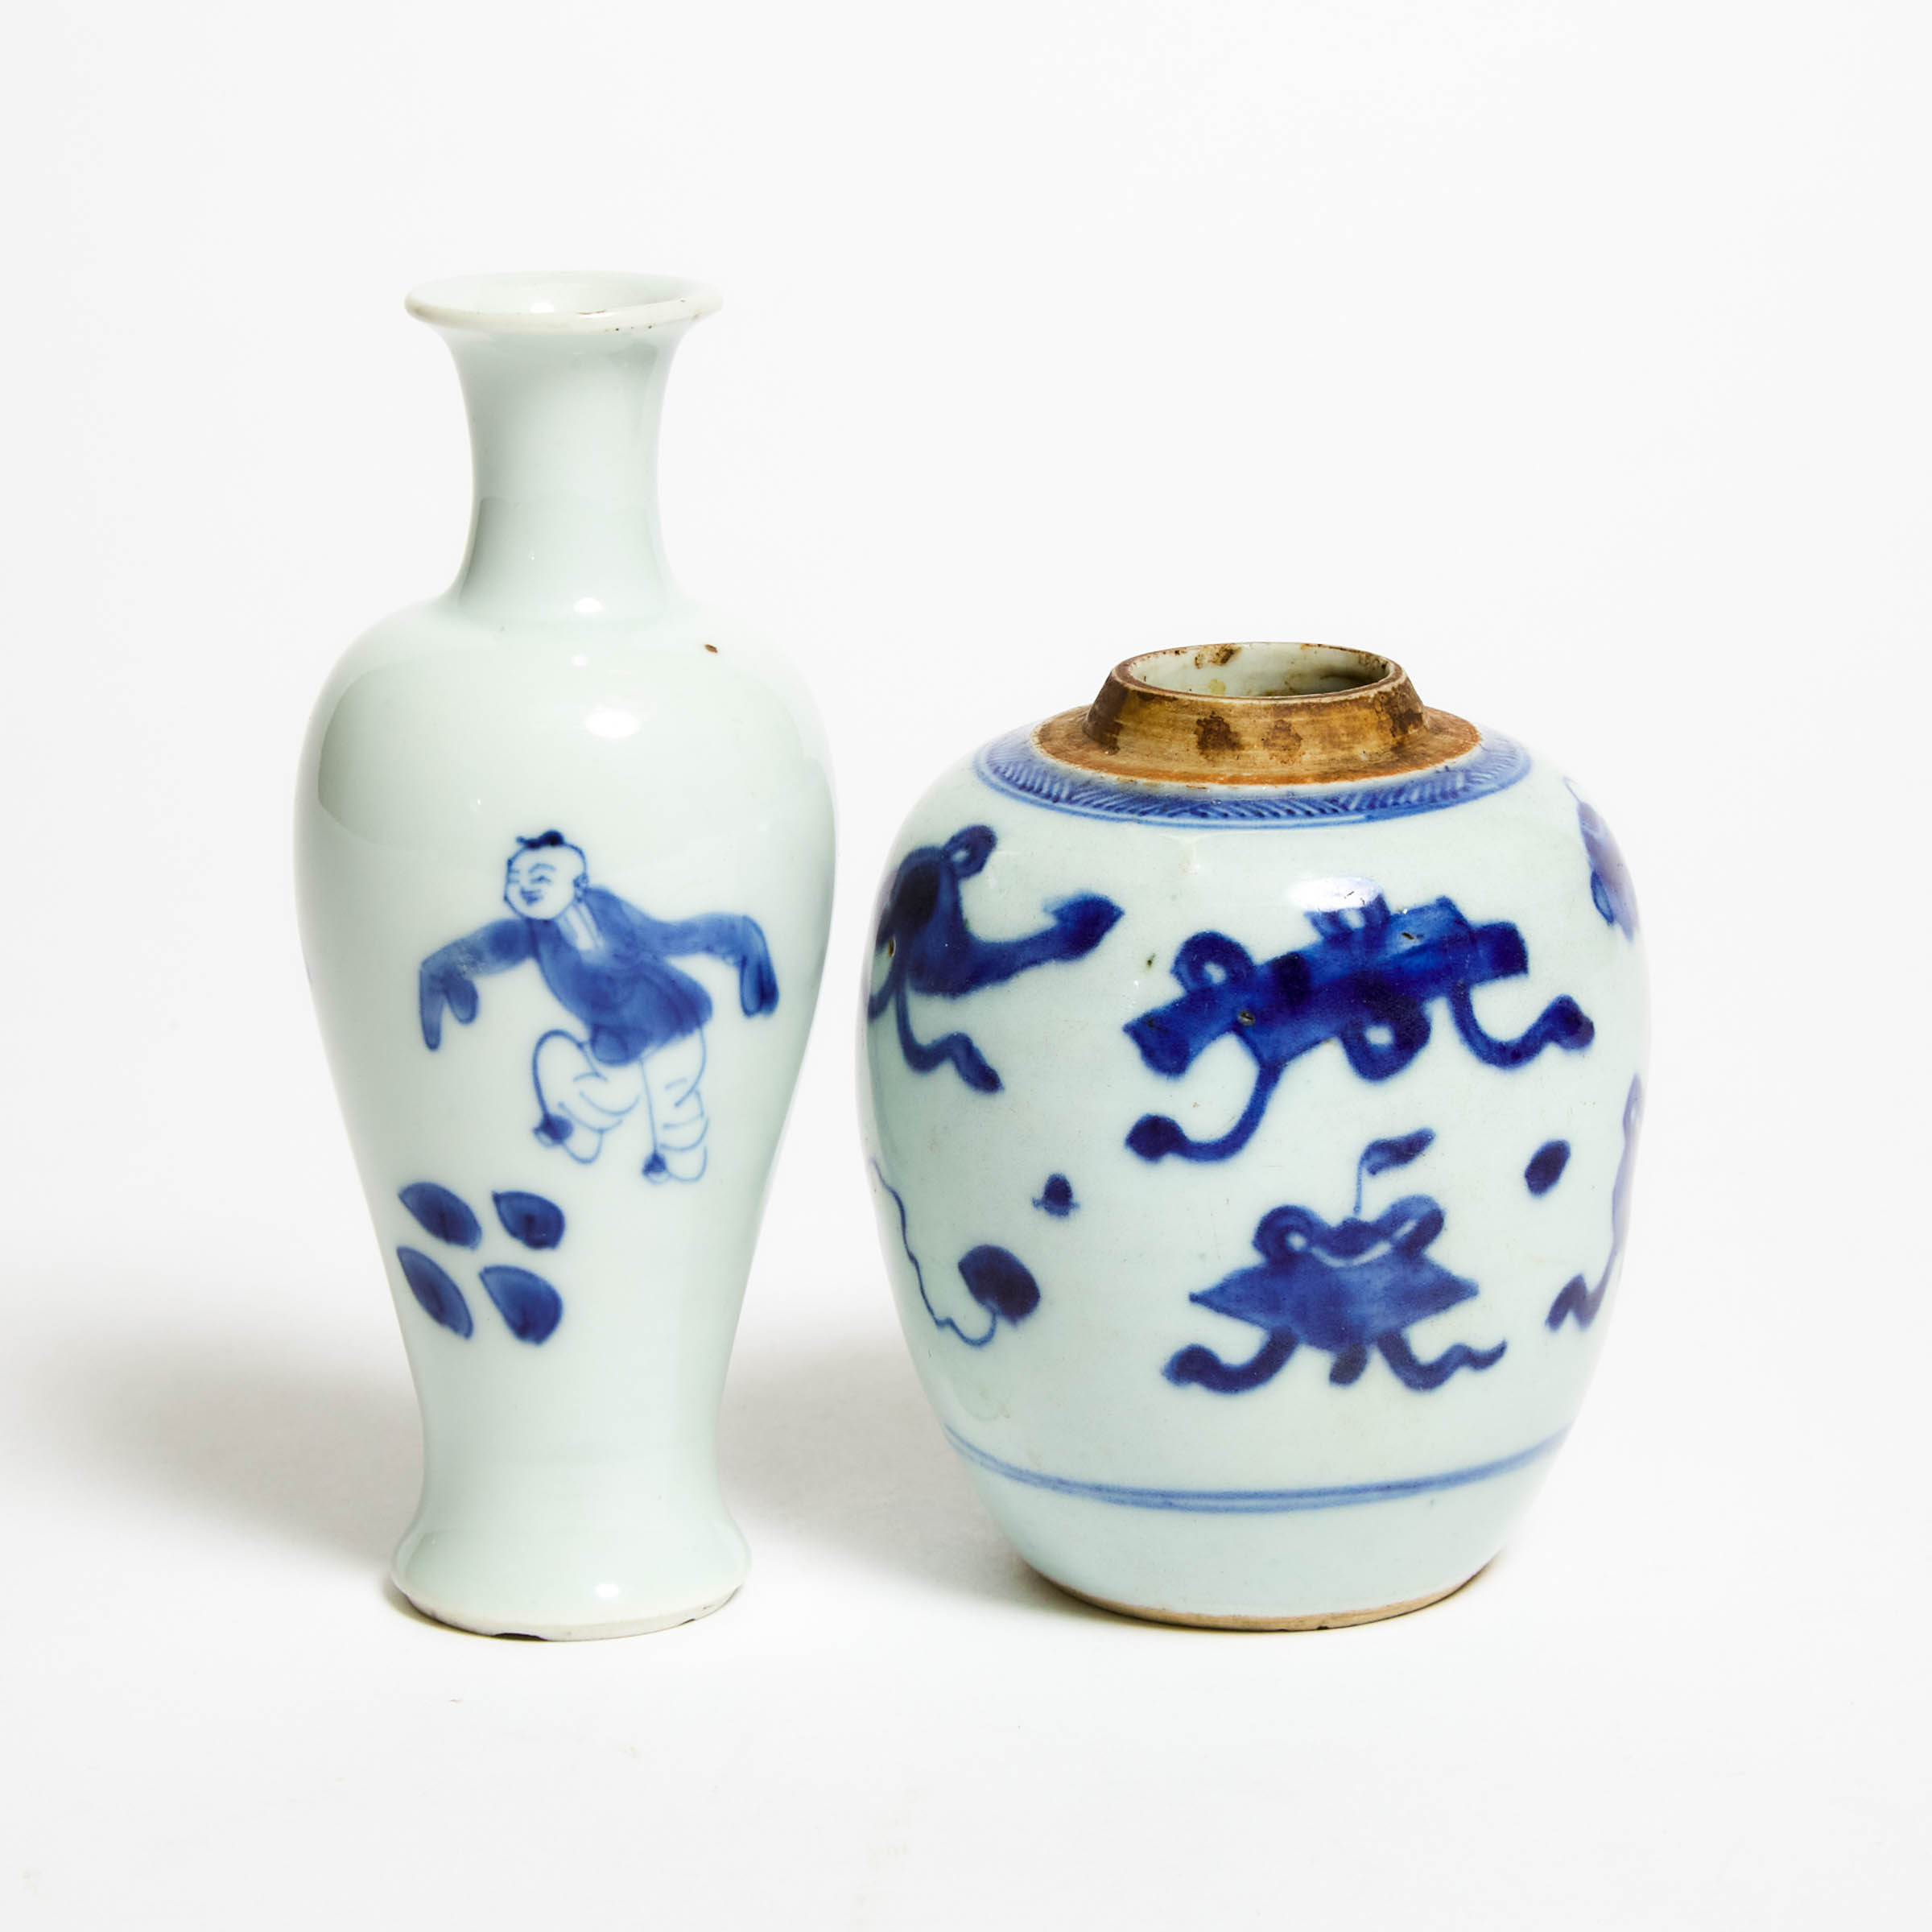 A Miniature Blue and White 'Boys' Vase, Together With a 'Hundred Antiques' Jar, Kangxi Period (1662-1722)